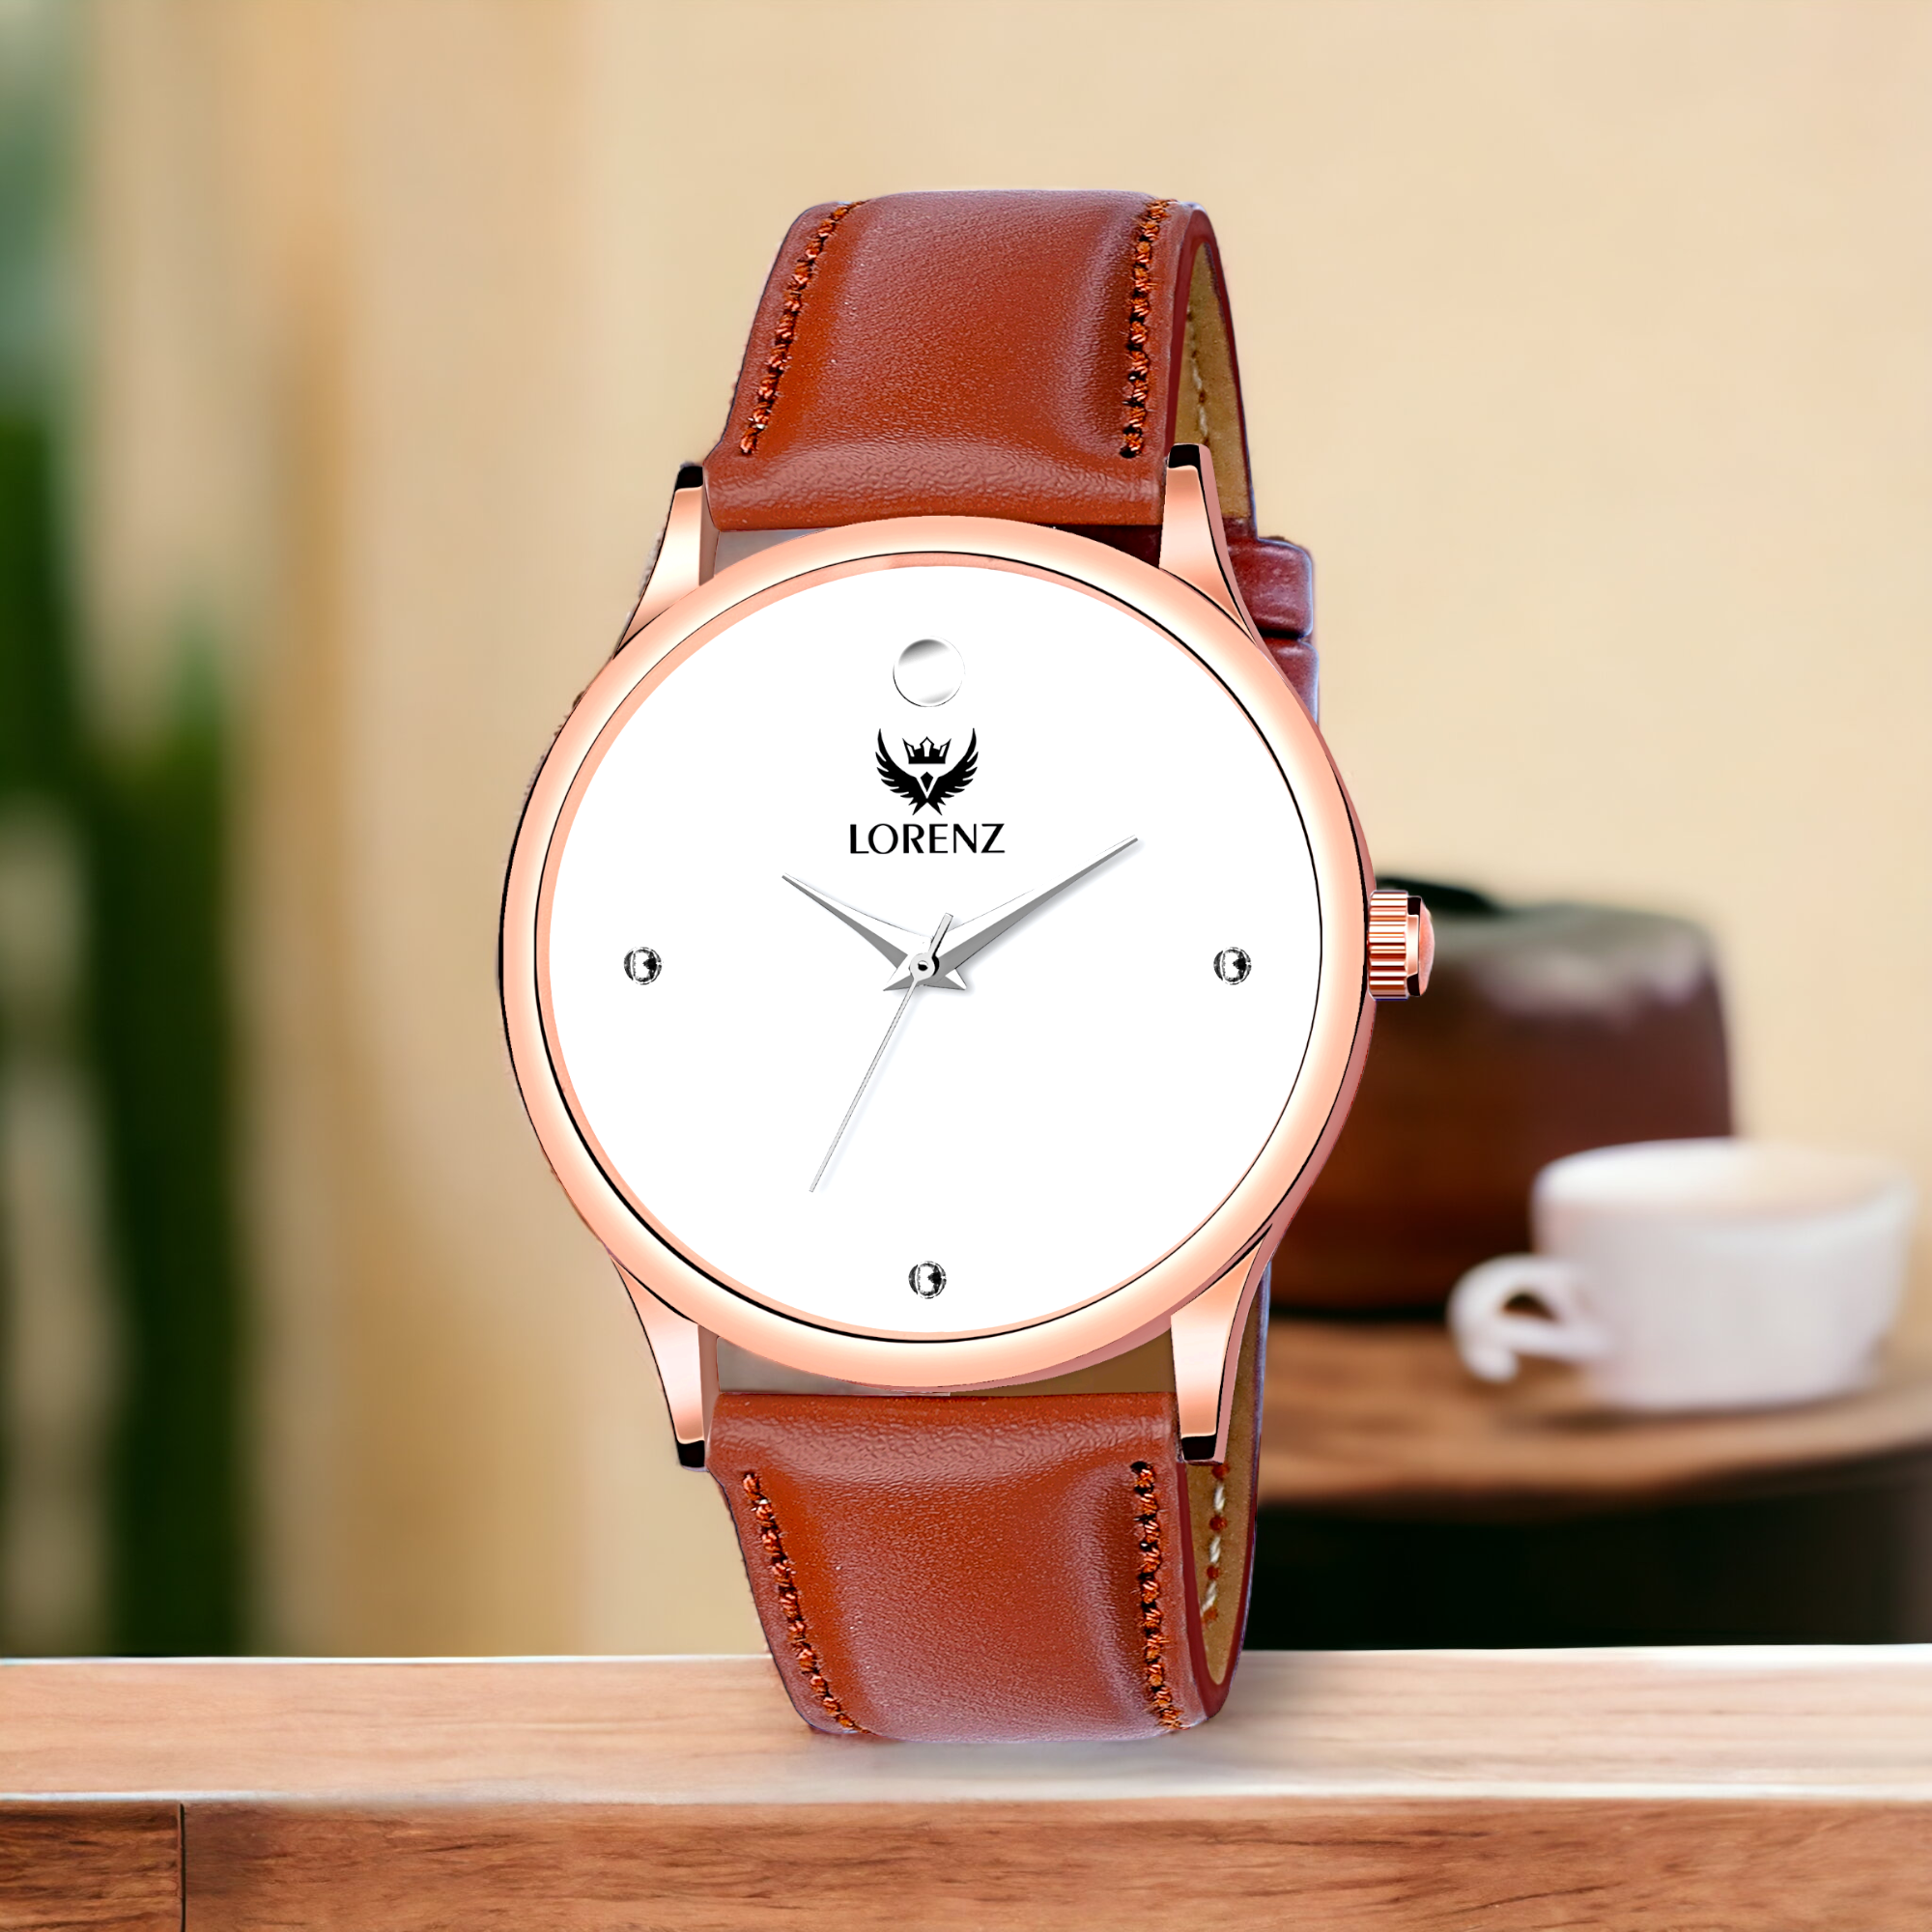 Lorenz Minimalist Copper Dial Watch with Brown Leather Strap